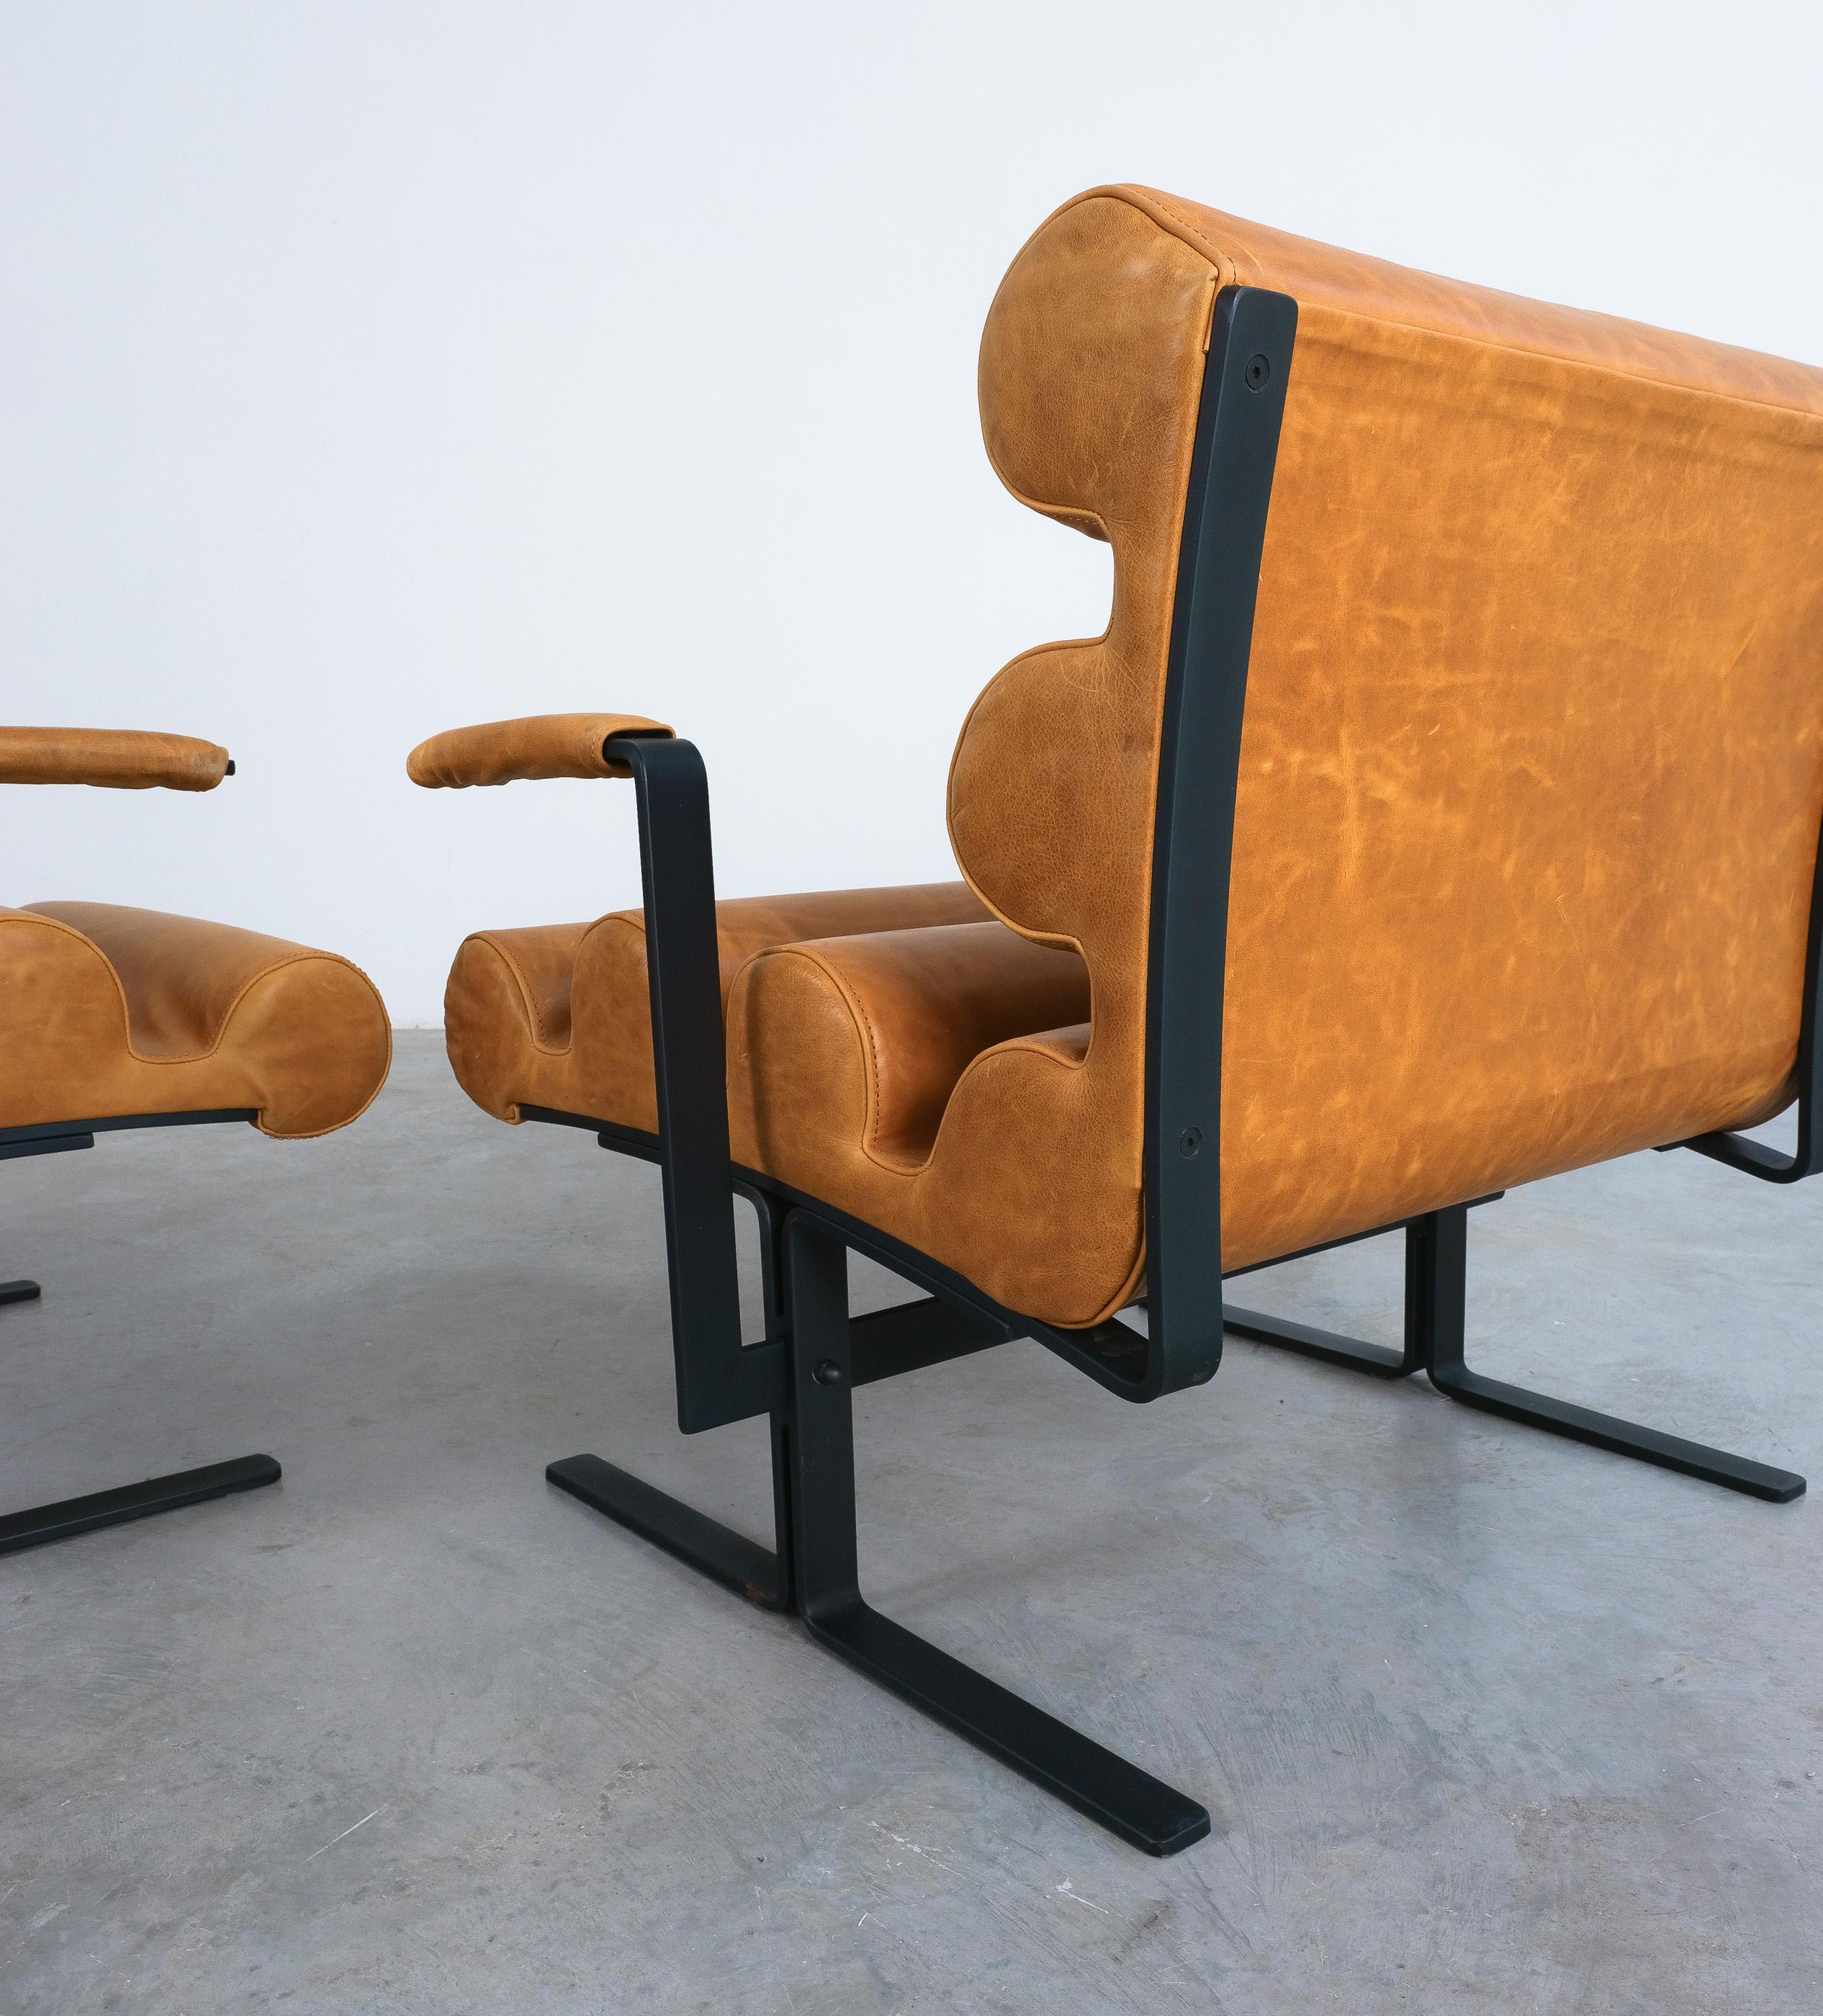 Joe Colombo For Sormani Roll Brown Leather Spring Steel Armchair Pair (2) , 1962 For Sale 10